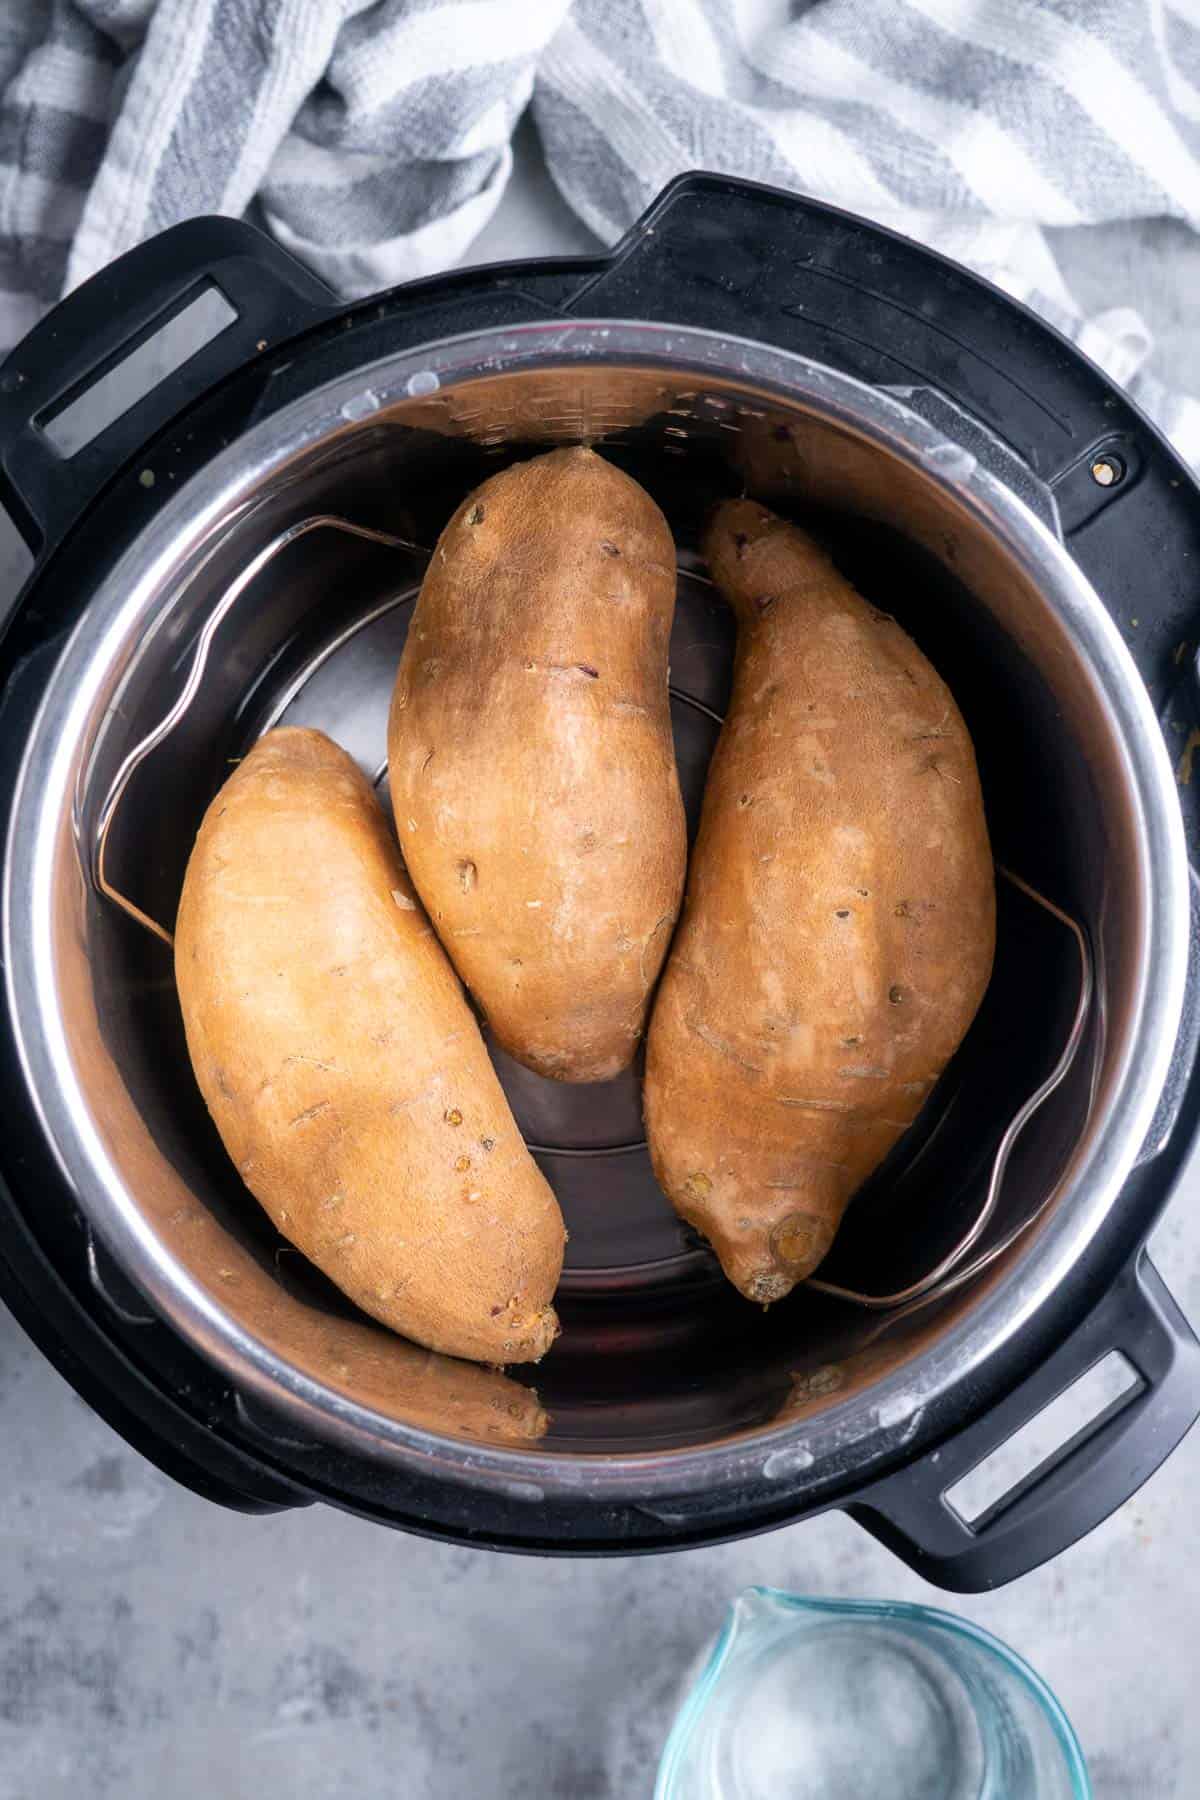 Three sweet potatoes on a trivet in the instant pot